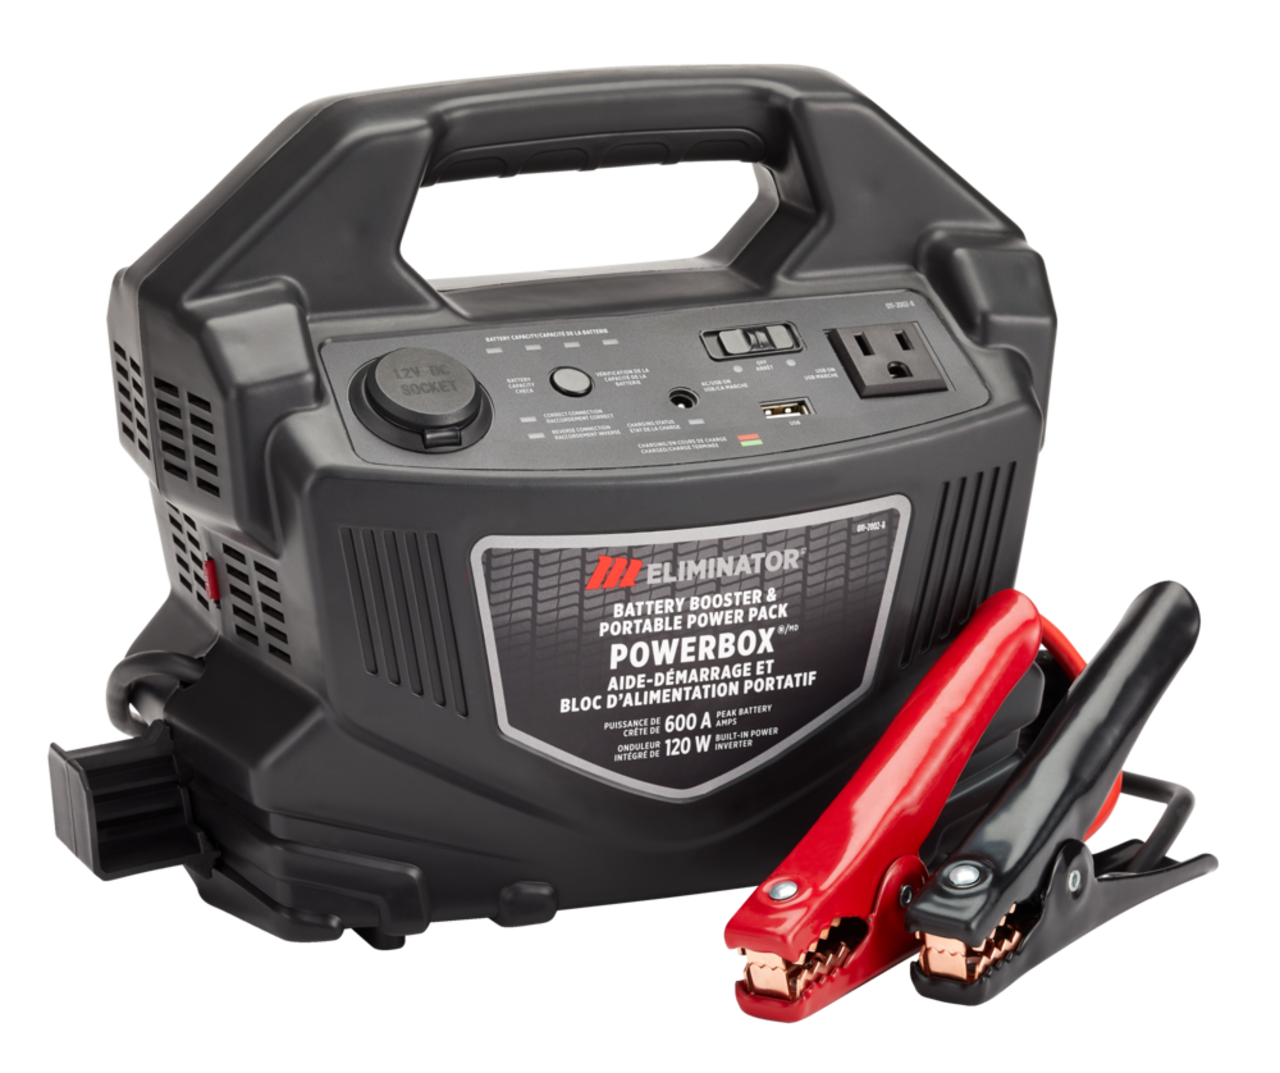 https://media-www.canadiantire.ca/product/automotive/light-auto-parts/auto-battery-accessories/0112002/motomaster-eliminator-600a-120w-power-box-4193abd2-750d-4b4e-a68f-abfdae9088b2.png?imdensity=1&imwidth=640&impolicy=mZoom